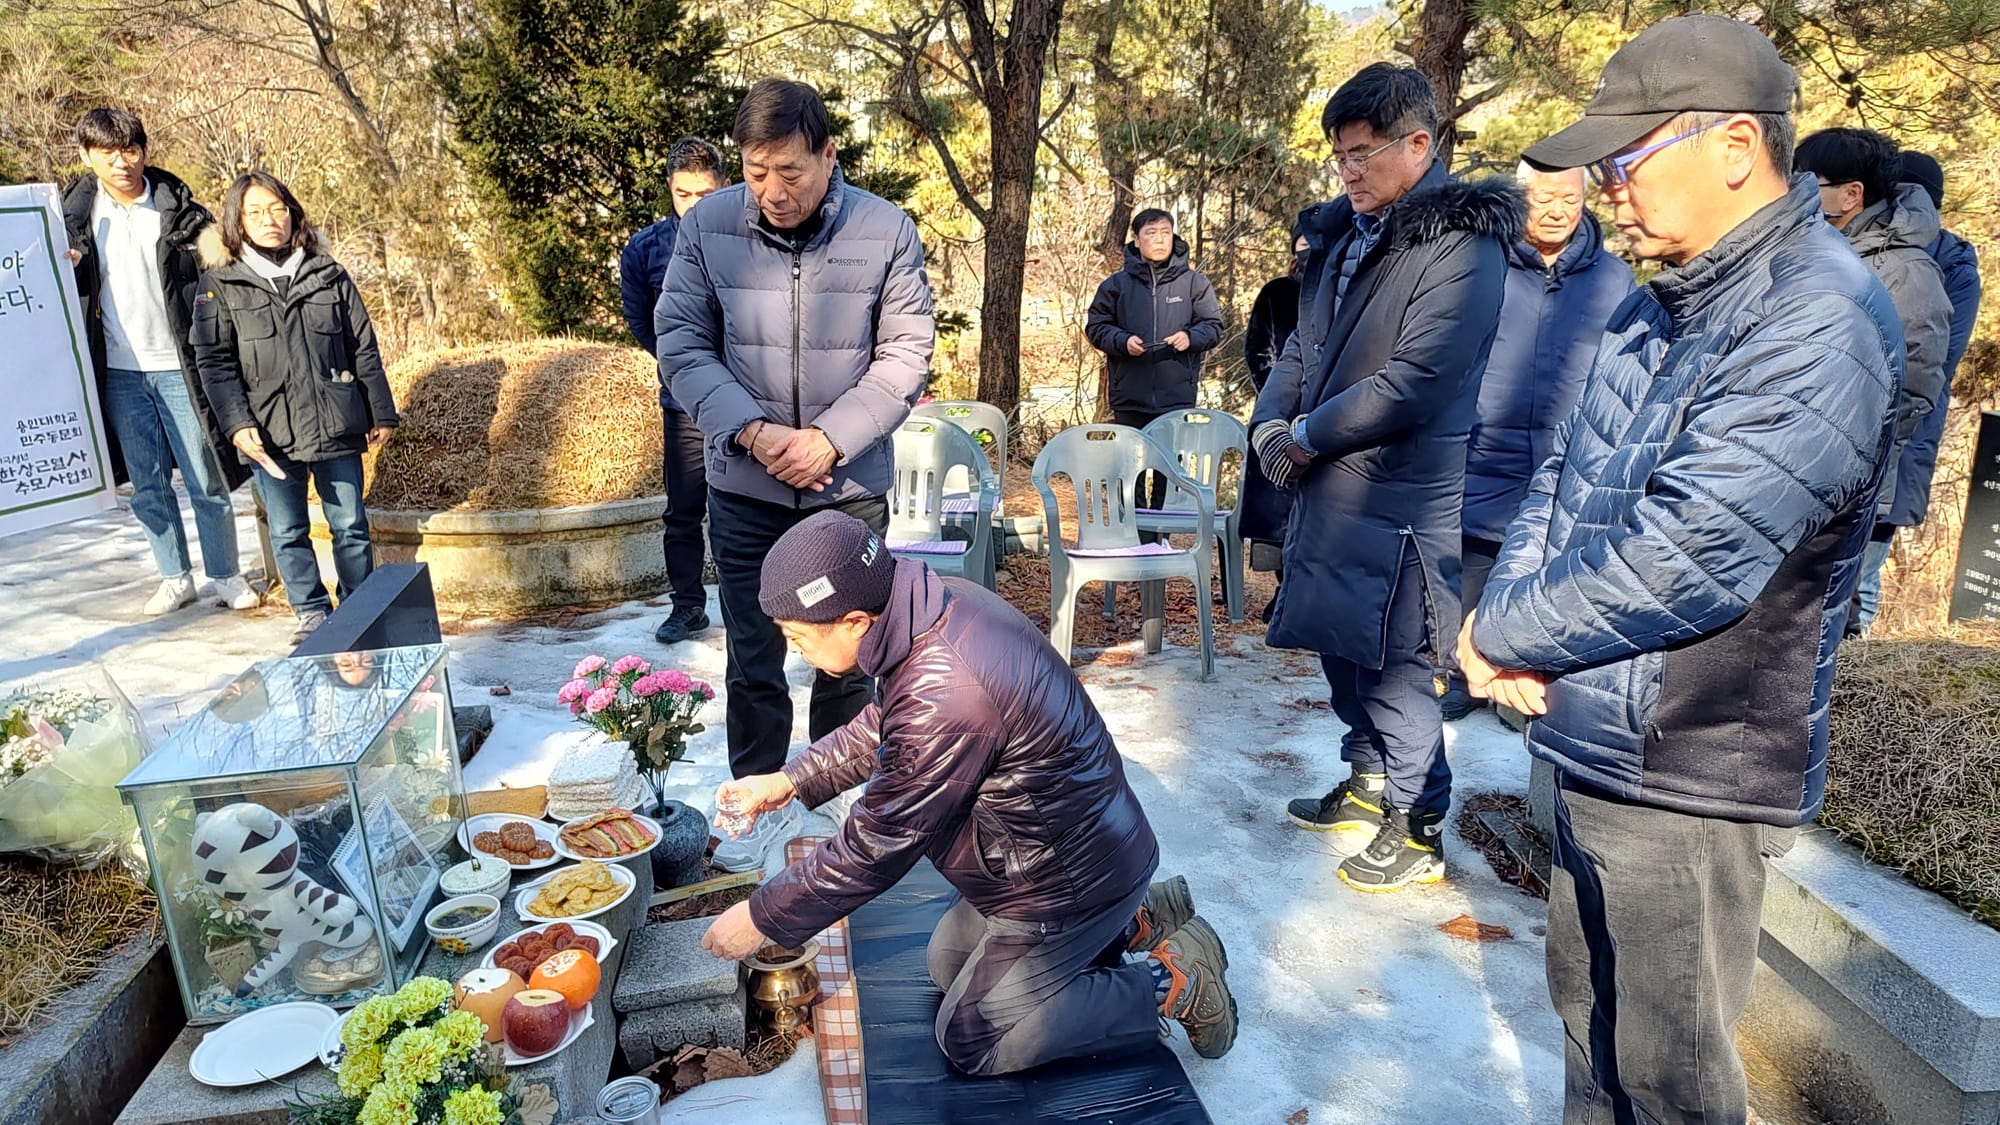 Memorial service for the 27th anniversary of the death of Han Sang-geun at the National Democratic Martyrs' Cemetery in Moran Park, Maseok. The image shows a number of winter coat clad people stand around a shrine on a bright day. There are fruits, cookies and other delicious foods on the altar, vases full of pink and yellow flowers, and a clear box with a cat plushie inside.